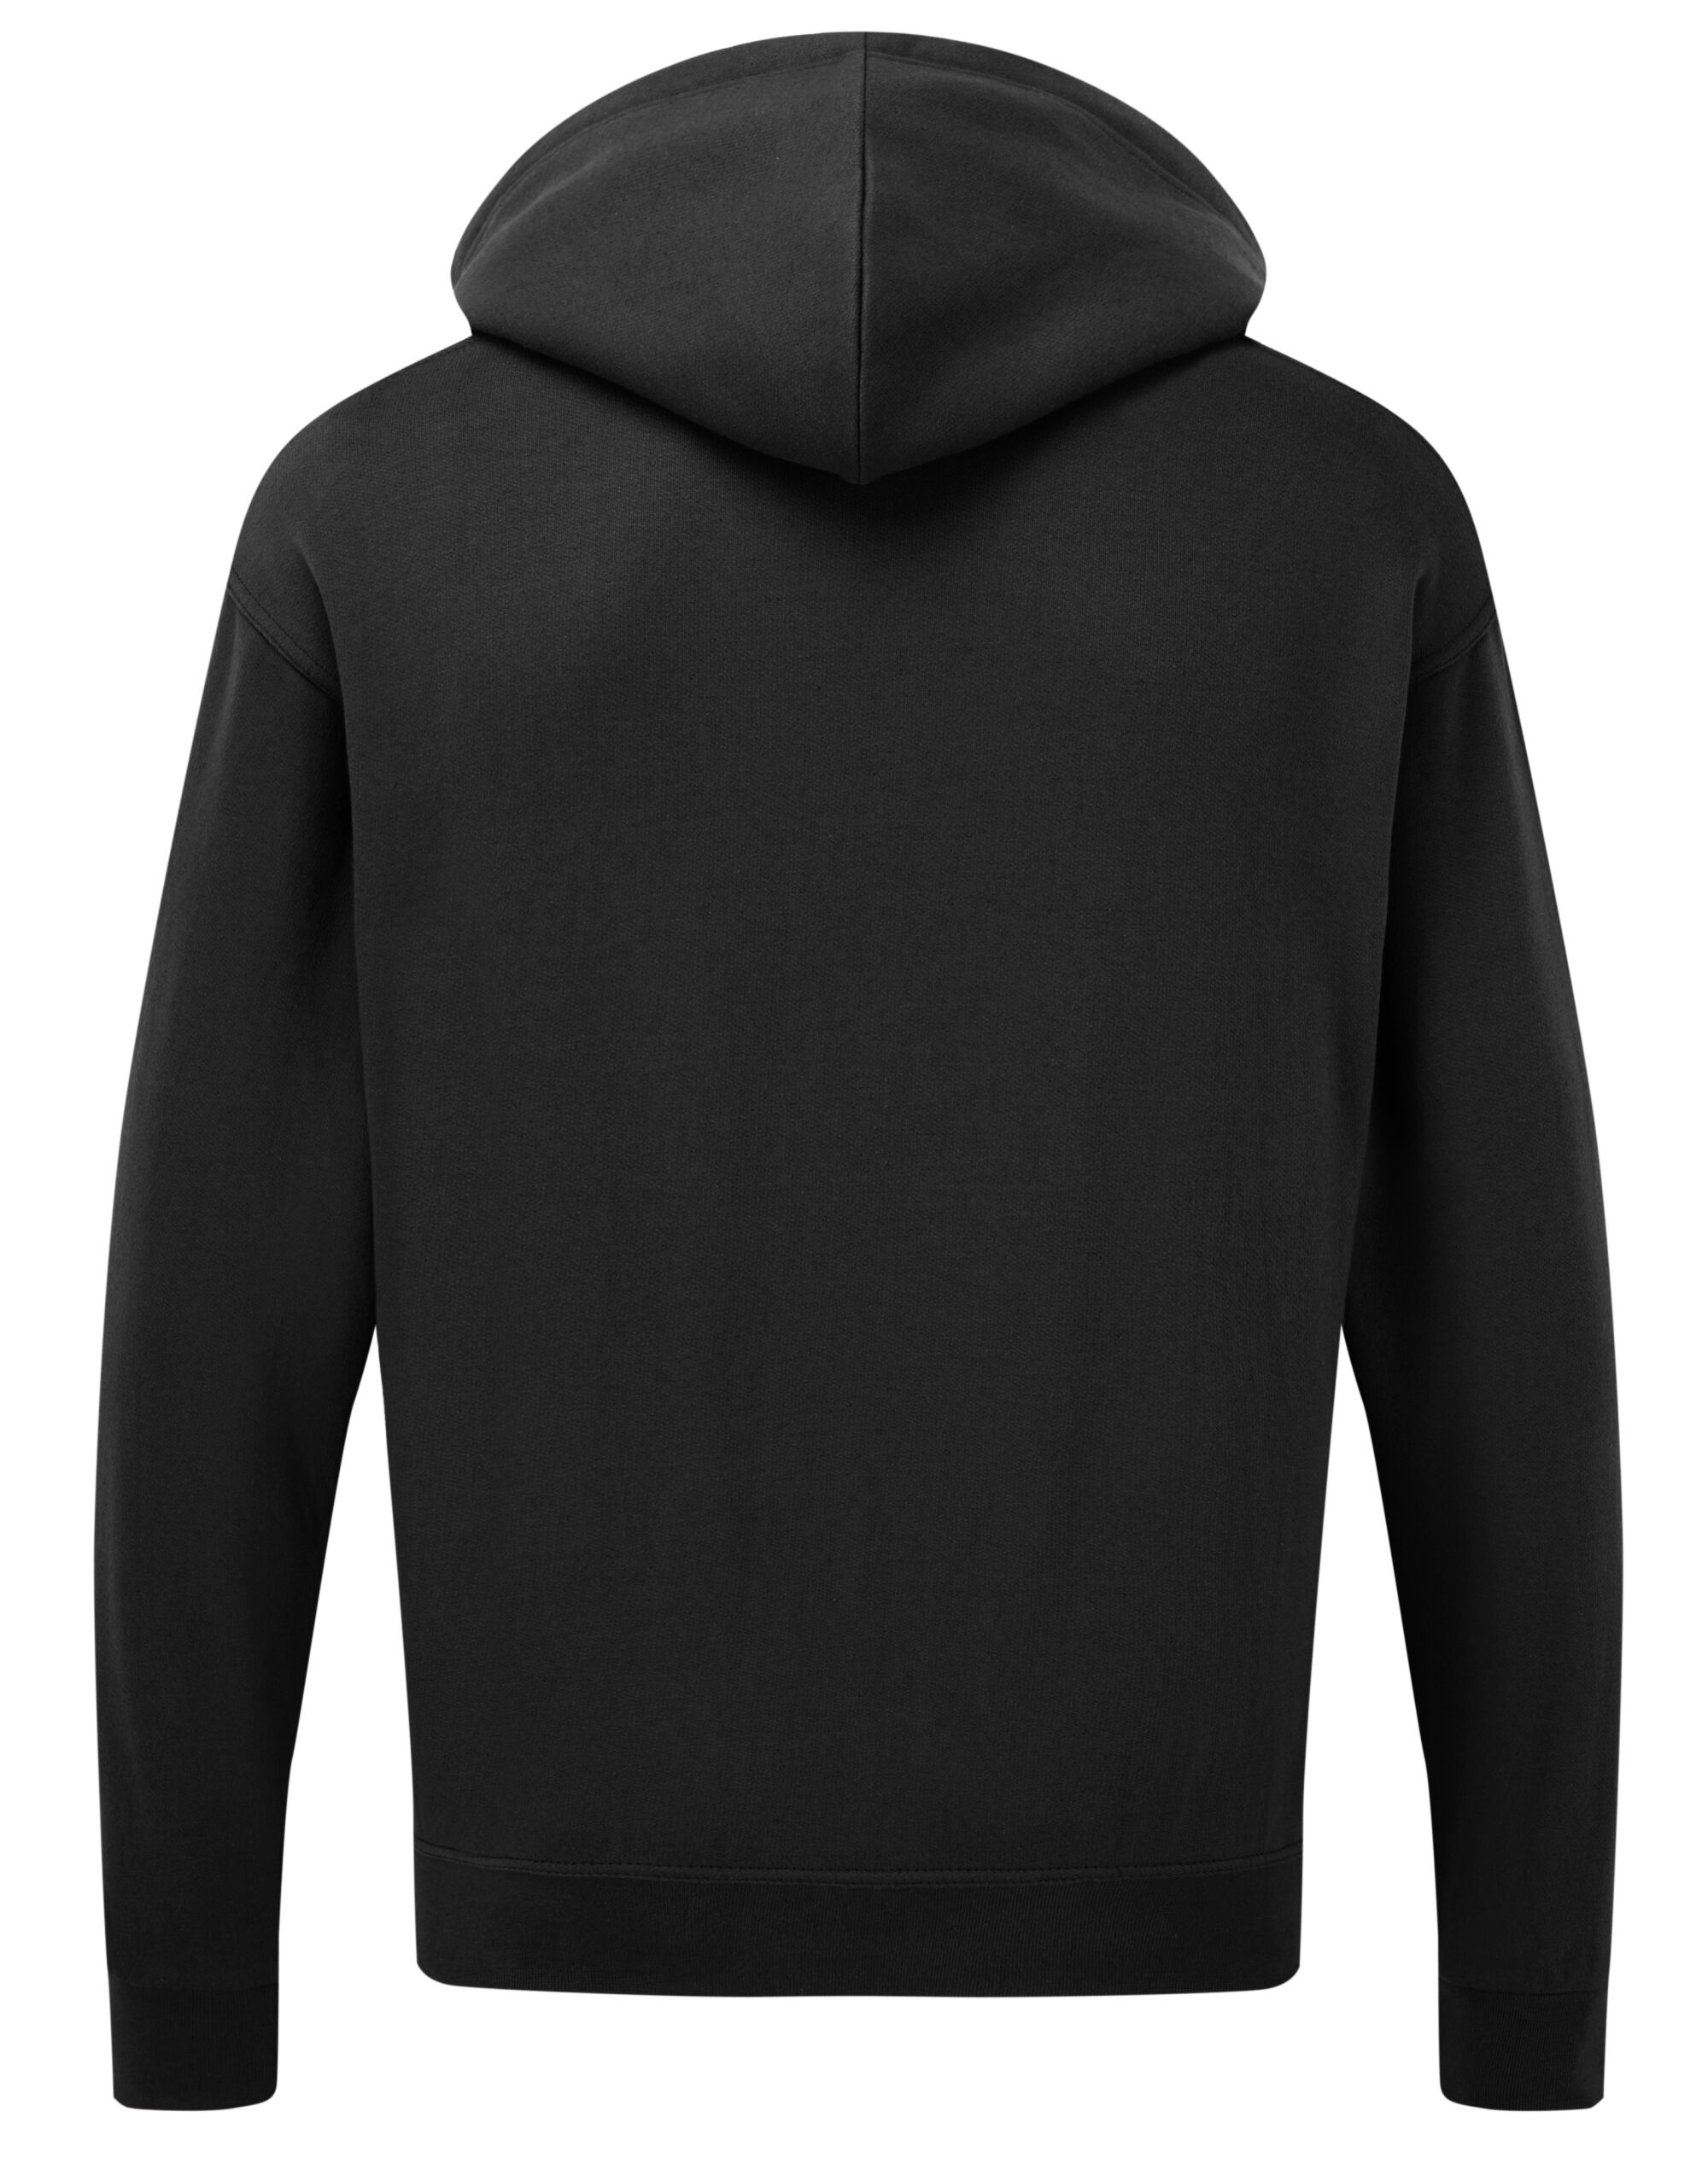 (UCC006) UCC Everyday Hooded Sweat Black Size 2XL | Stonehill Officeright